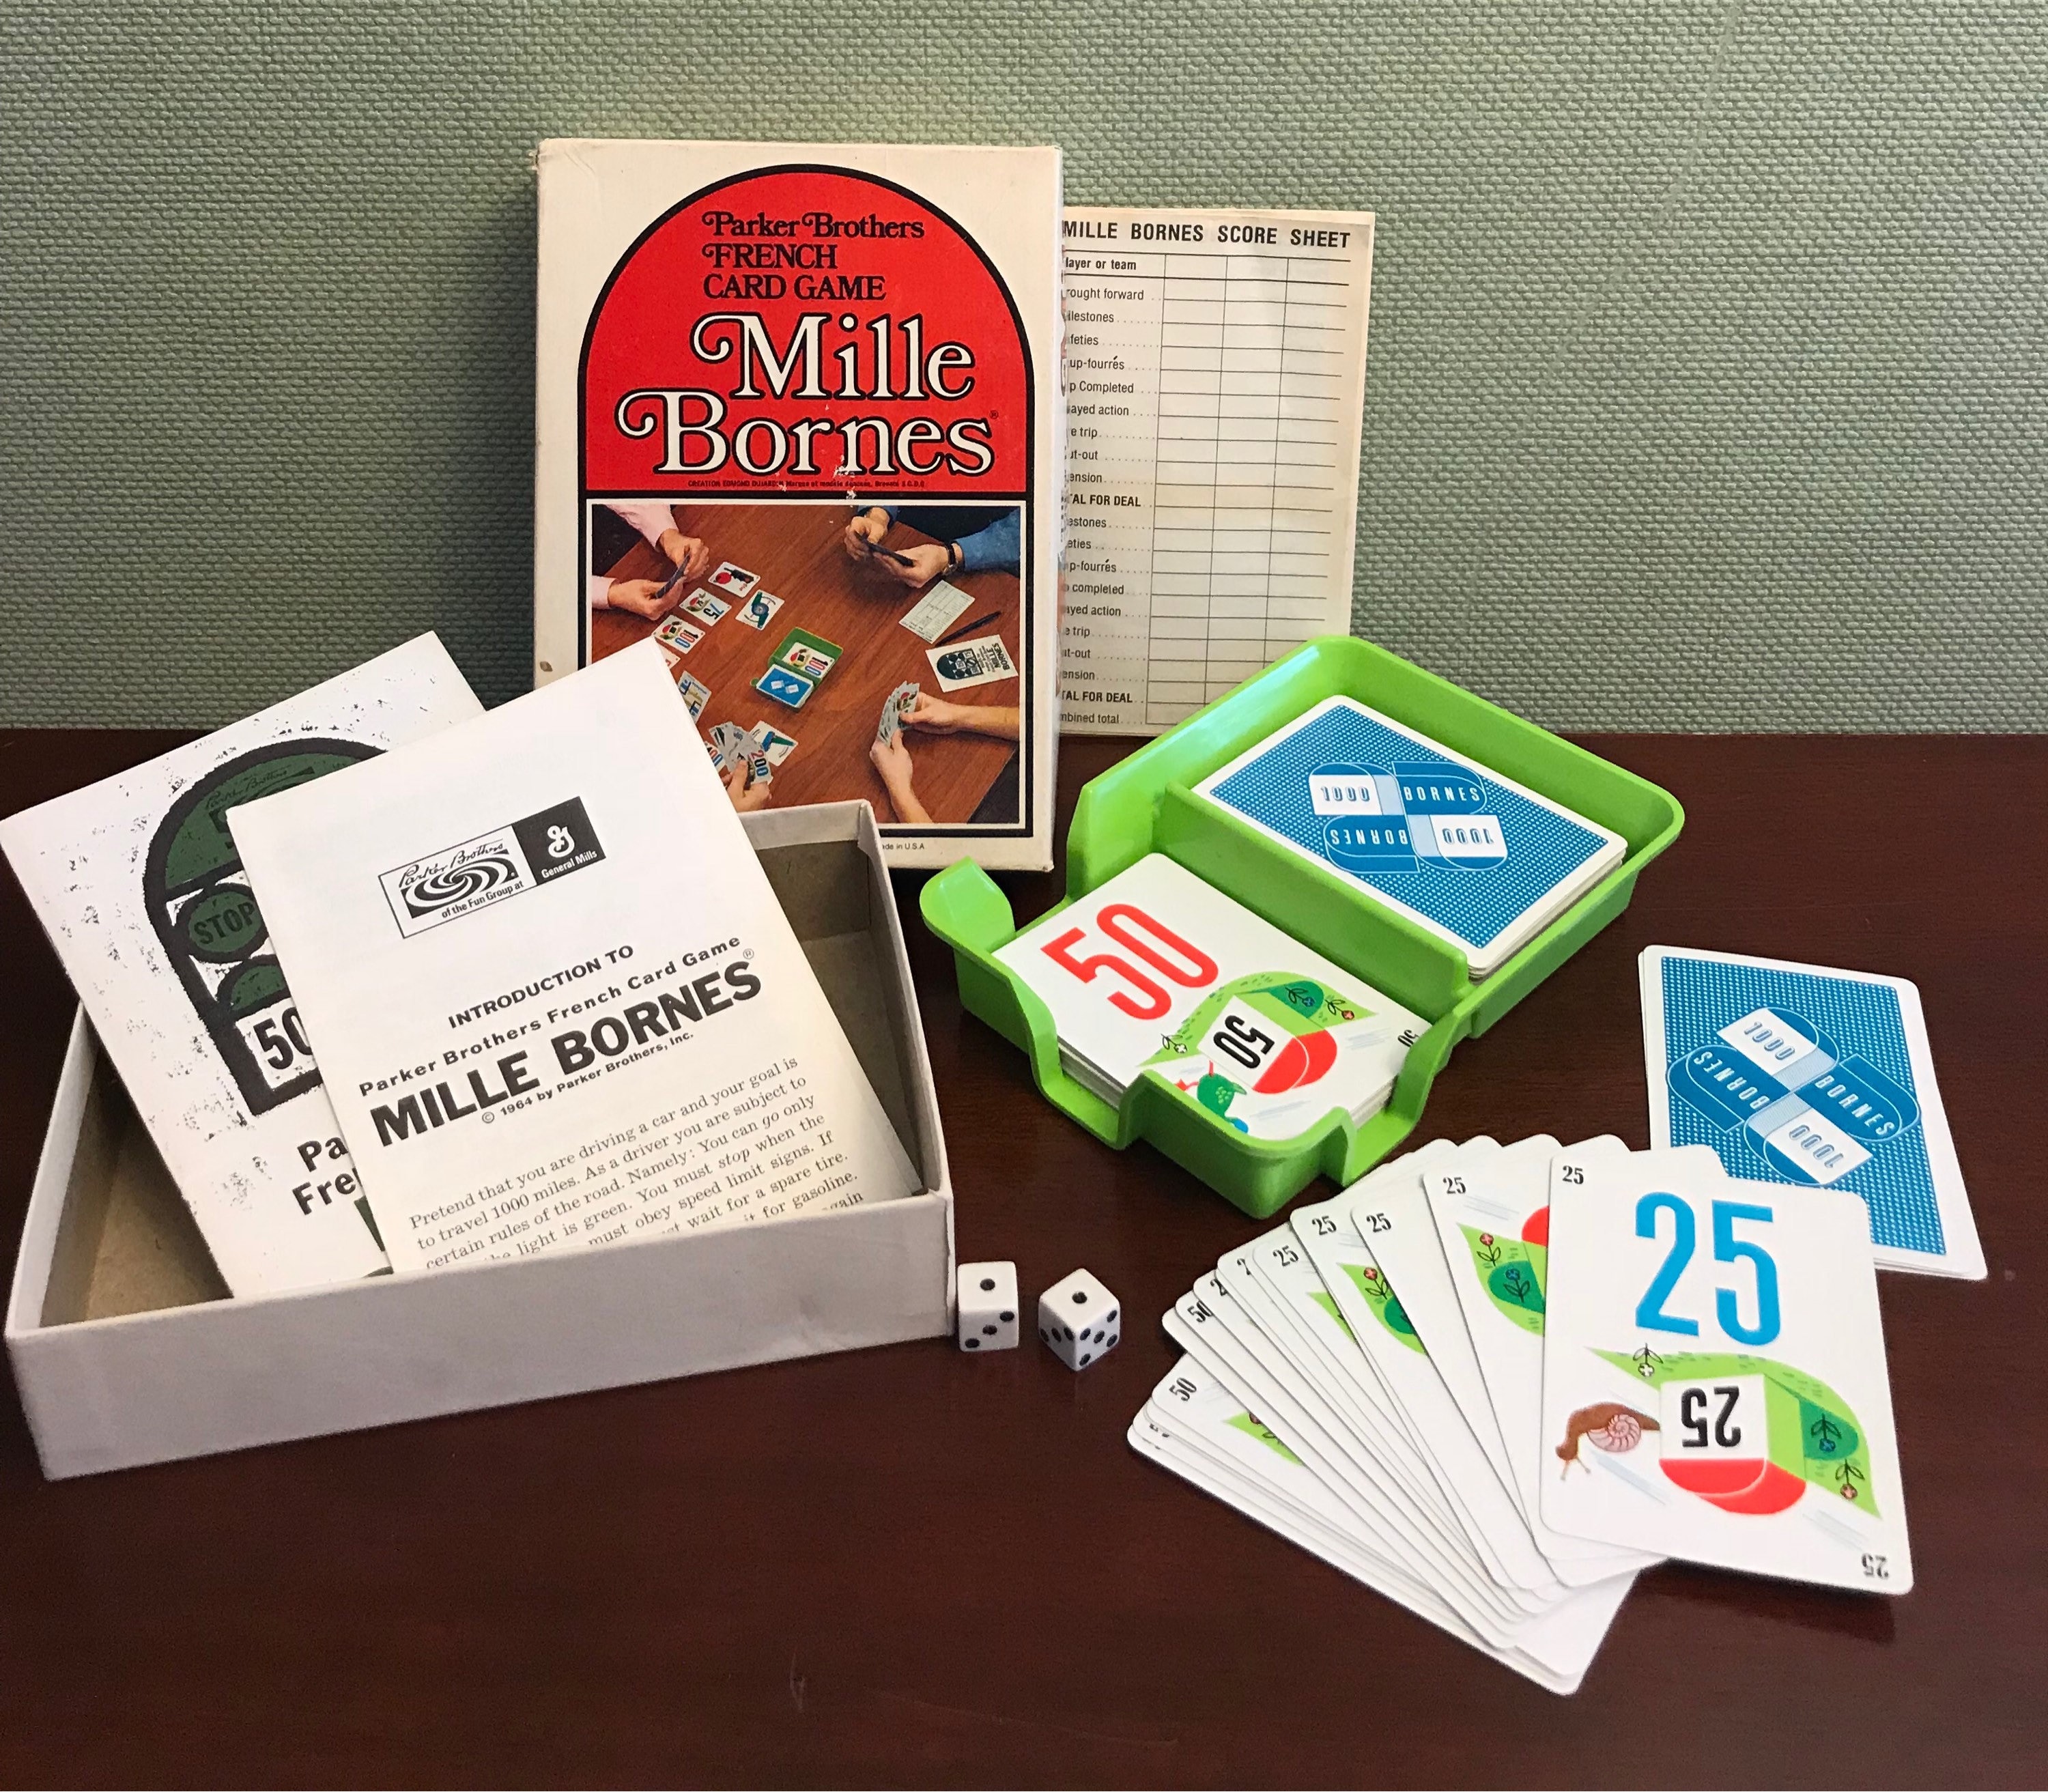 Mille Bornes Card Game (1960 Edition Spécial) - Fonts In Use